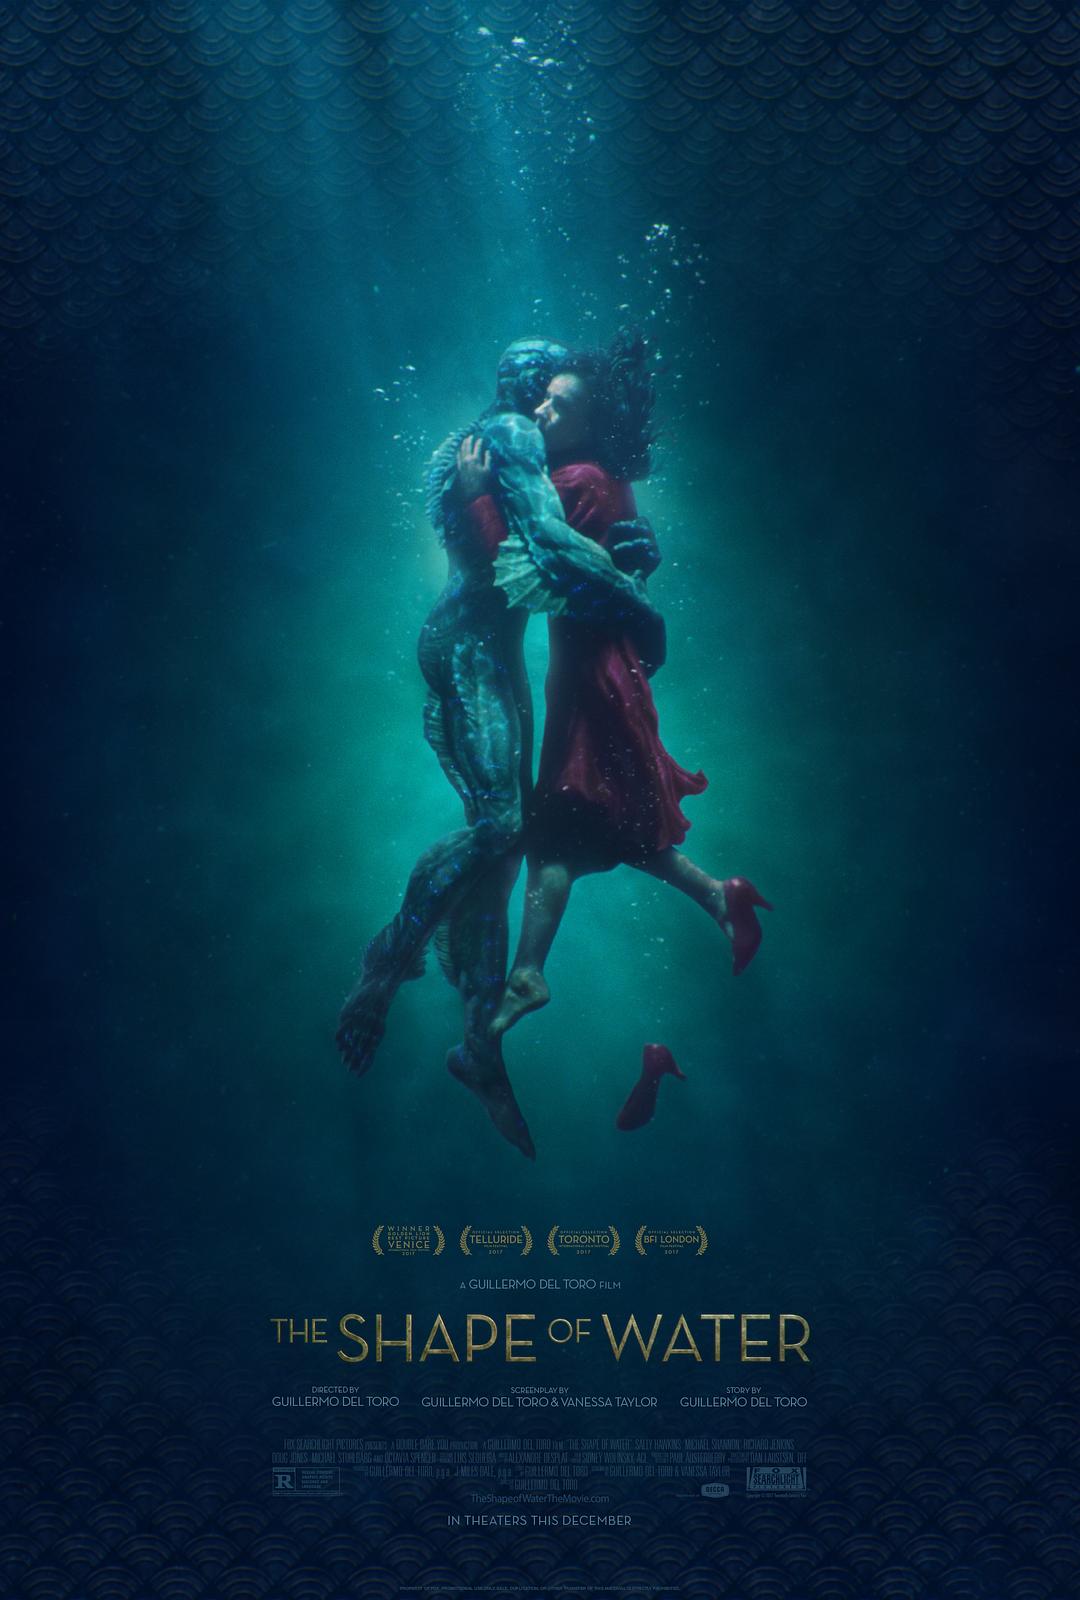 ˮ/ˮ The.Shape.of.Water.2017.1080p.BluRay.x264.DTS-HD.MA.5.1-FGT 11.83GB-1.png